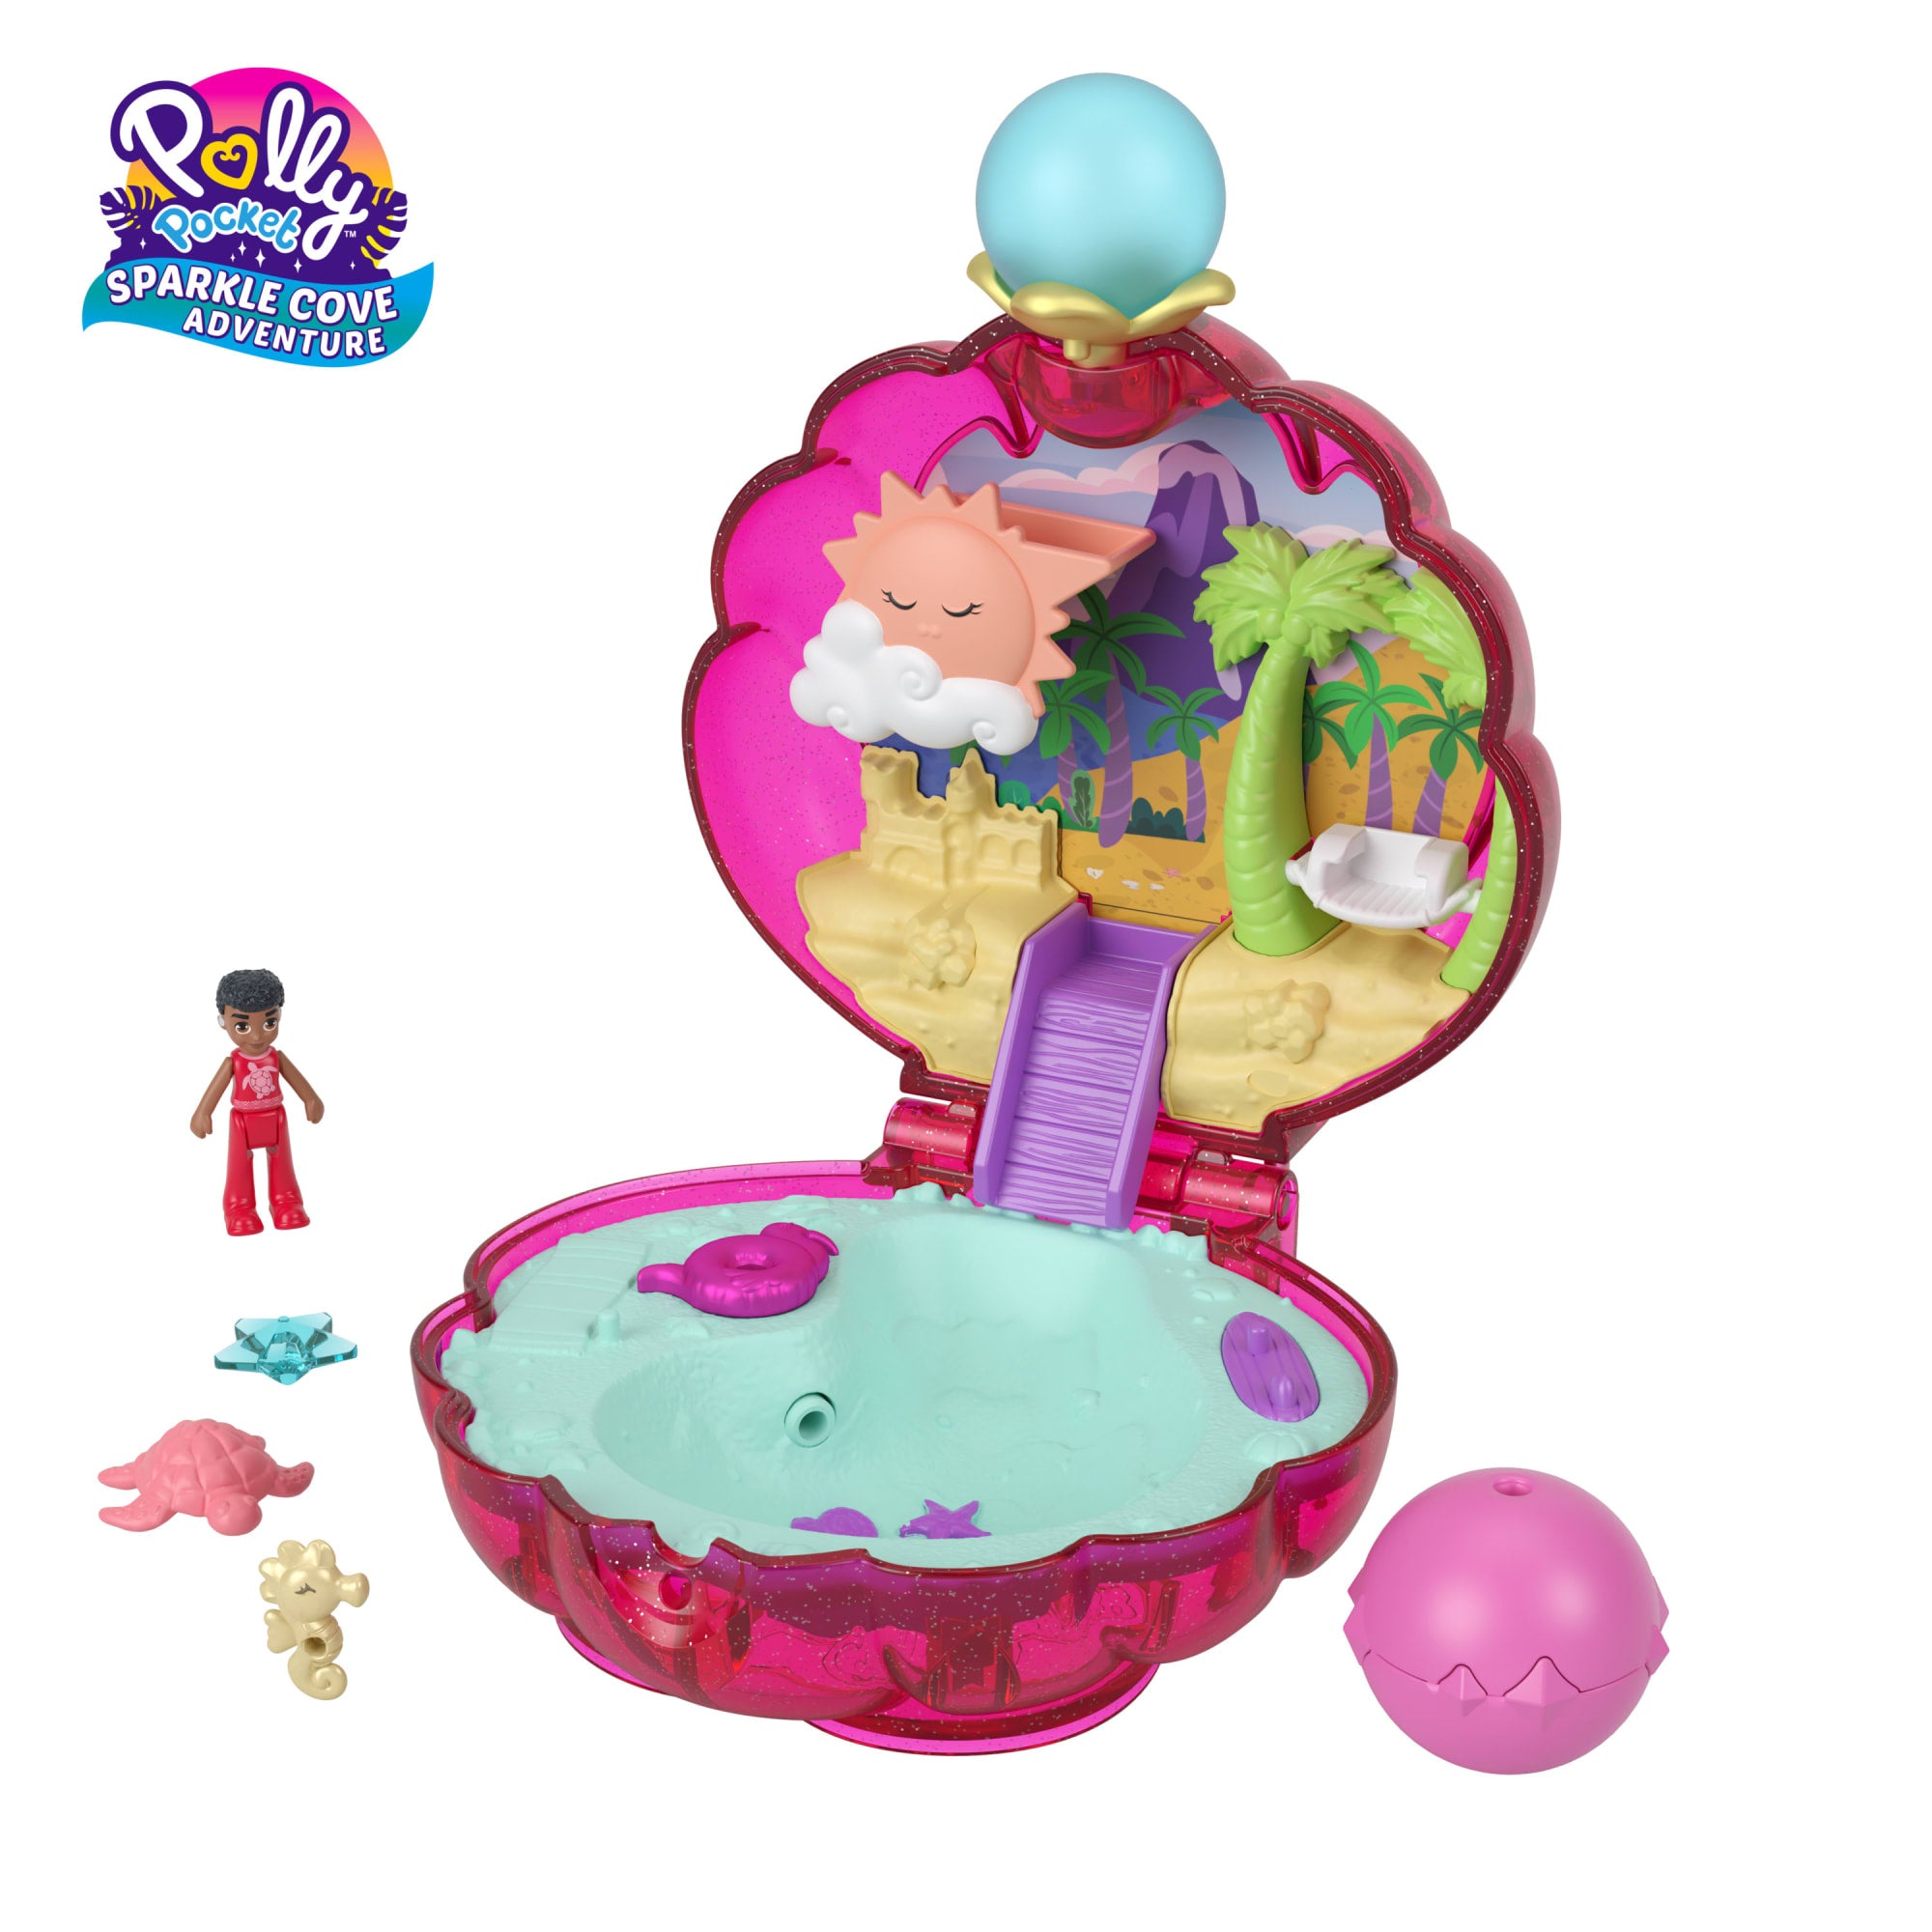 Polly Pocket Travel Toy Sparkle Cove Adventure Shell Compact